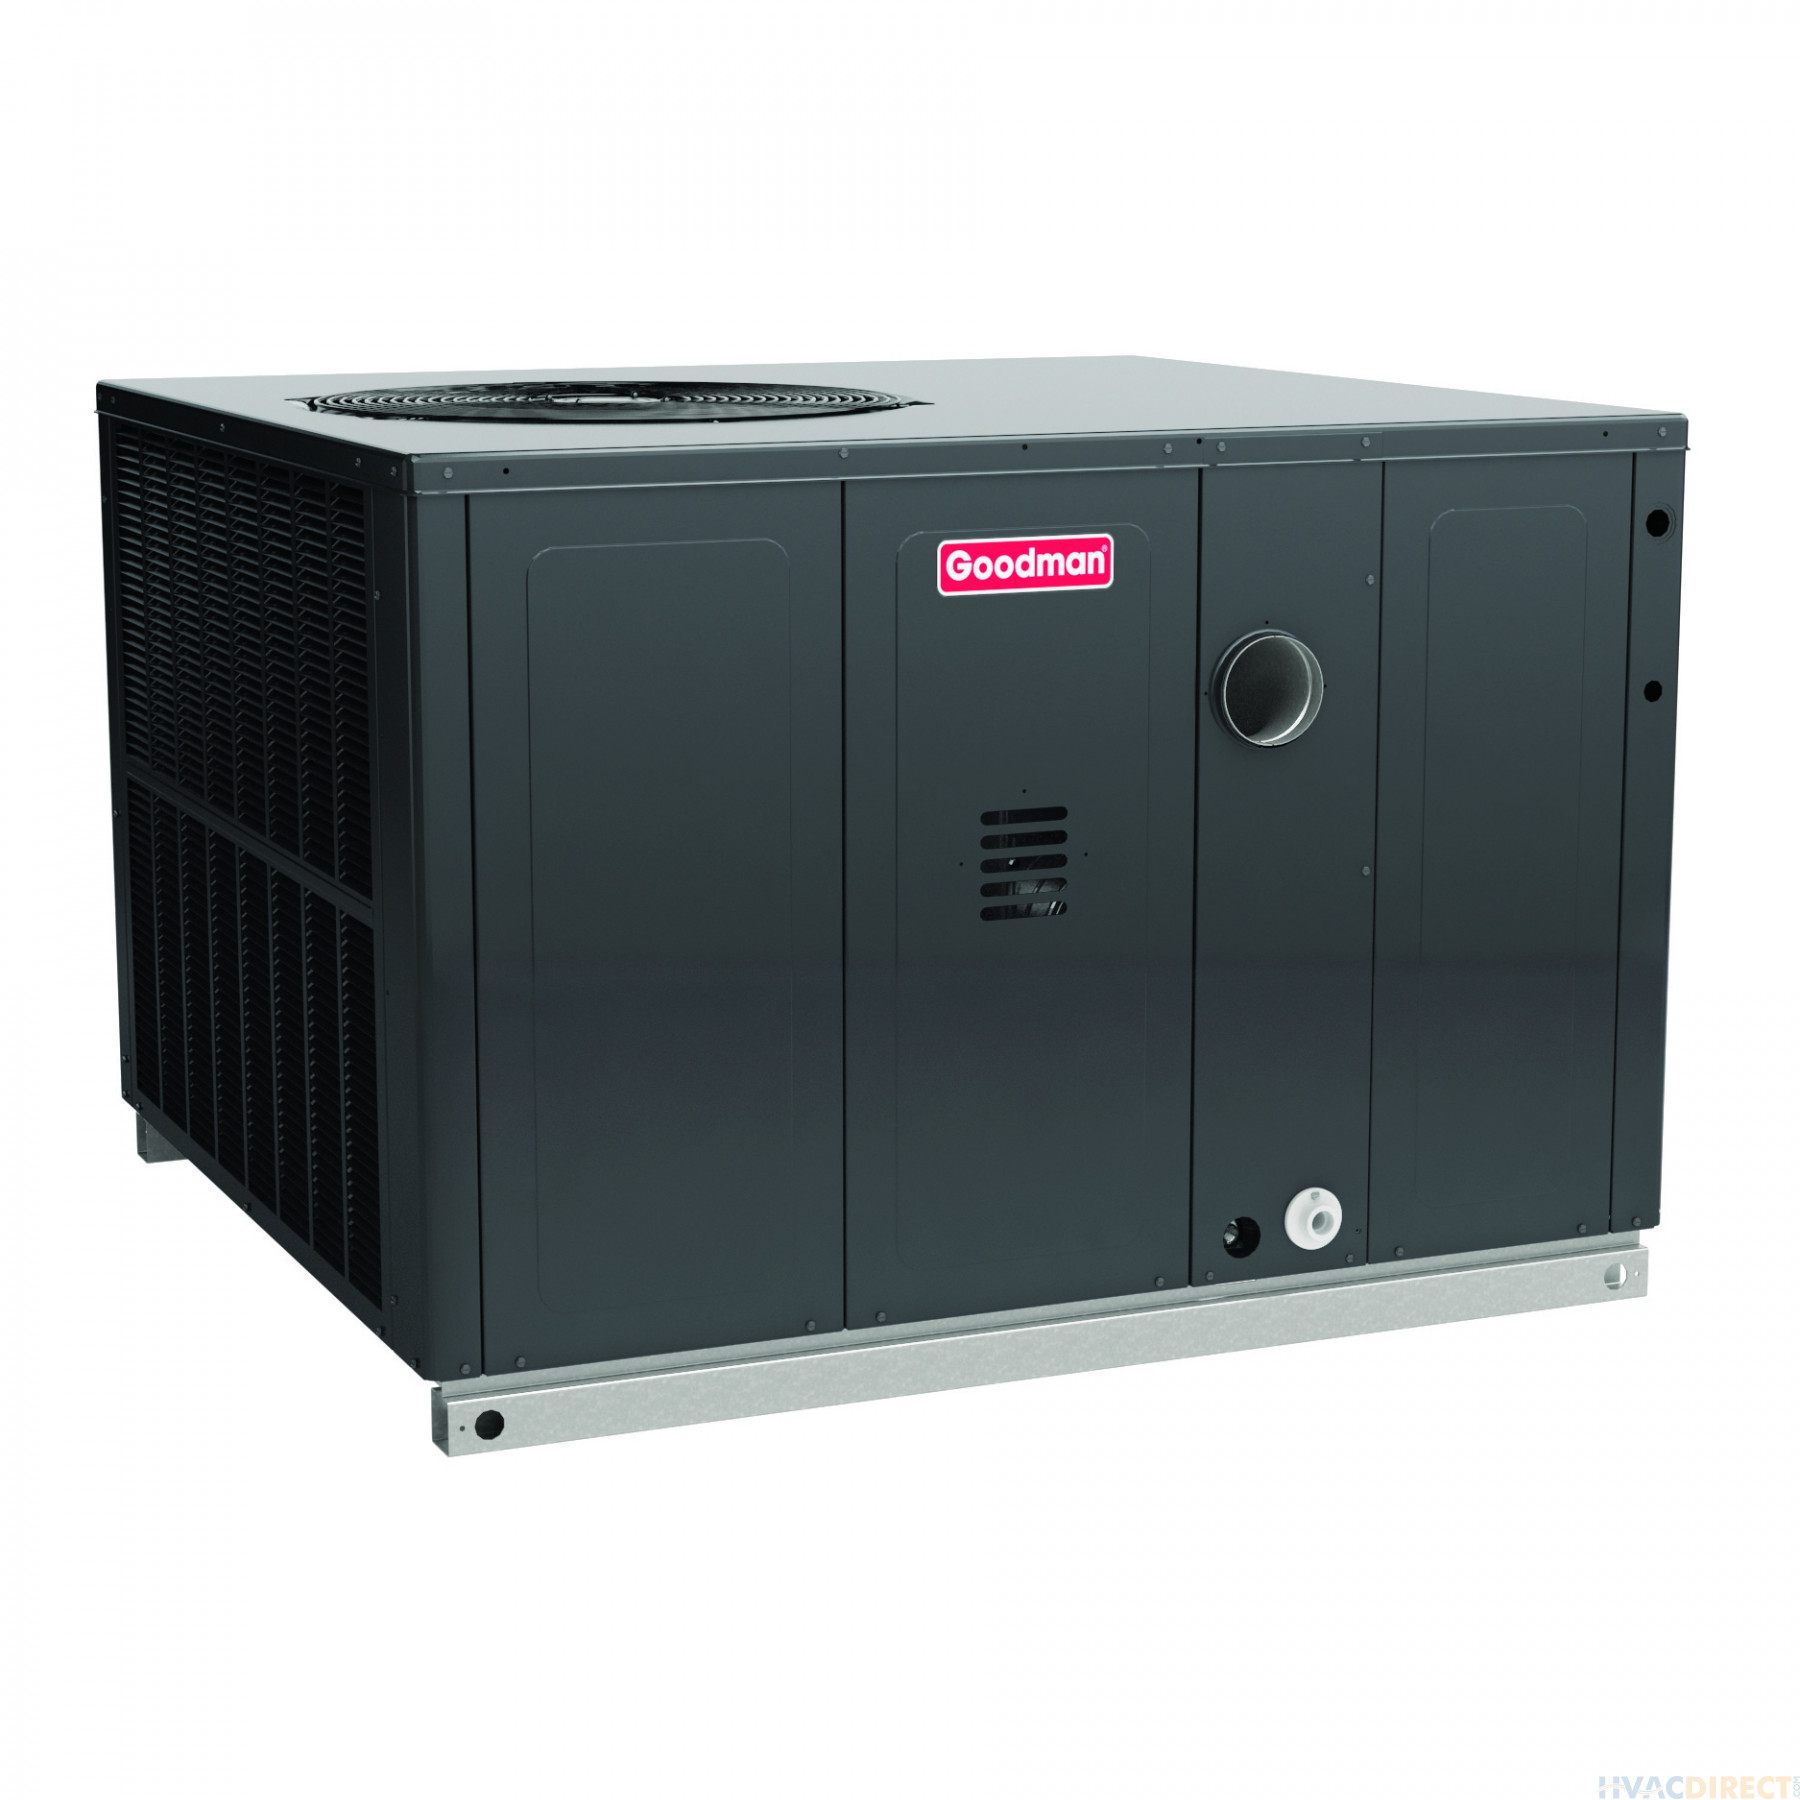 3.5 Ton 14 SEER 100,000 BTU Goodman Dual Fuel Heat Pump and Gas Package Unit - Front Right